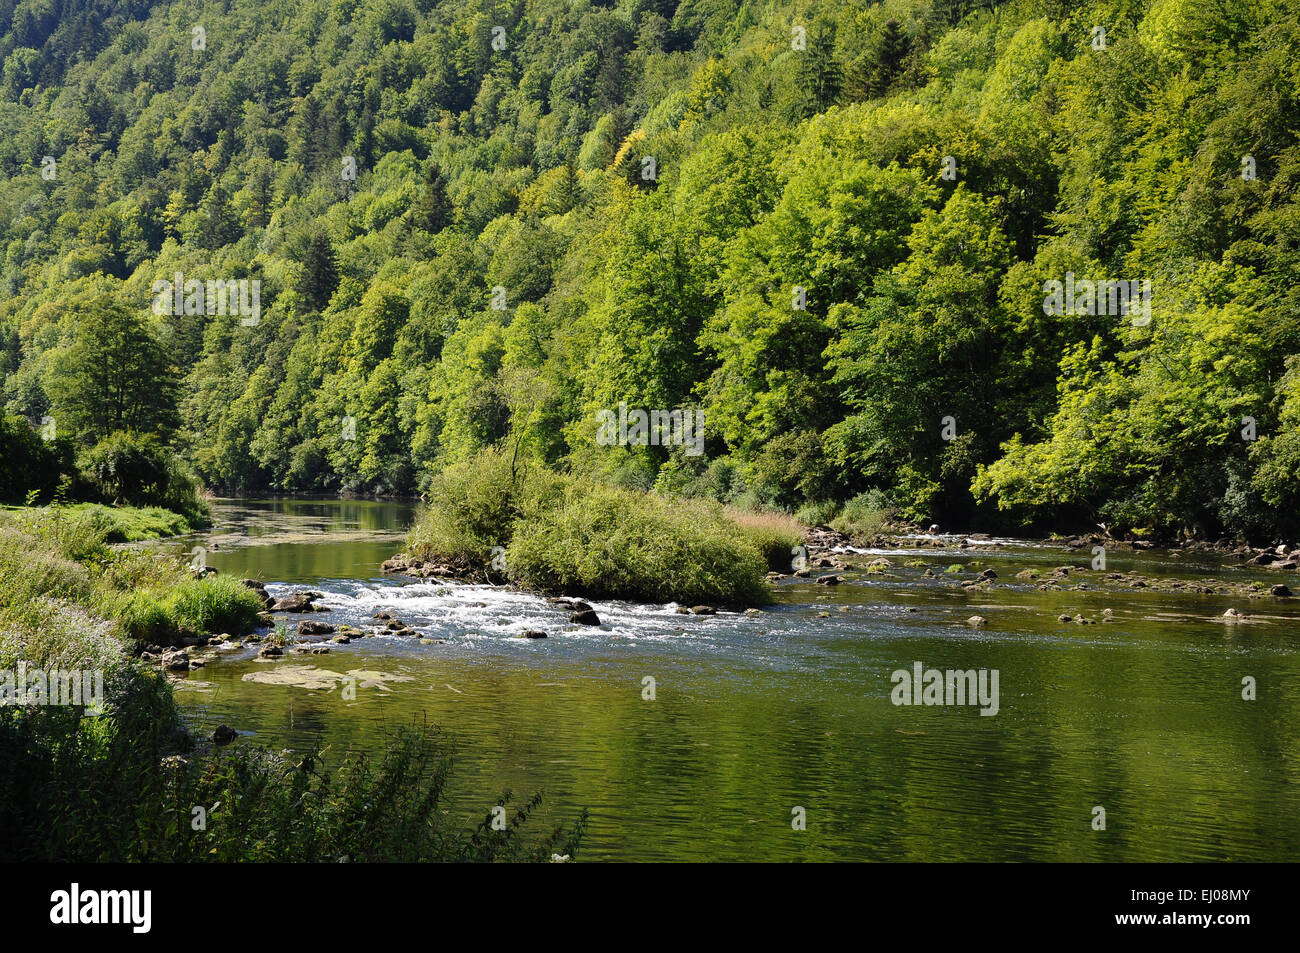 Switzerland, Europe, Jura, Doubs, river, flow, Clos du Doubs, Les Pommerats, Moulin Jeannotat, wood, forest, border, country bord Stock Photo